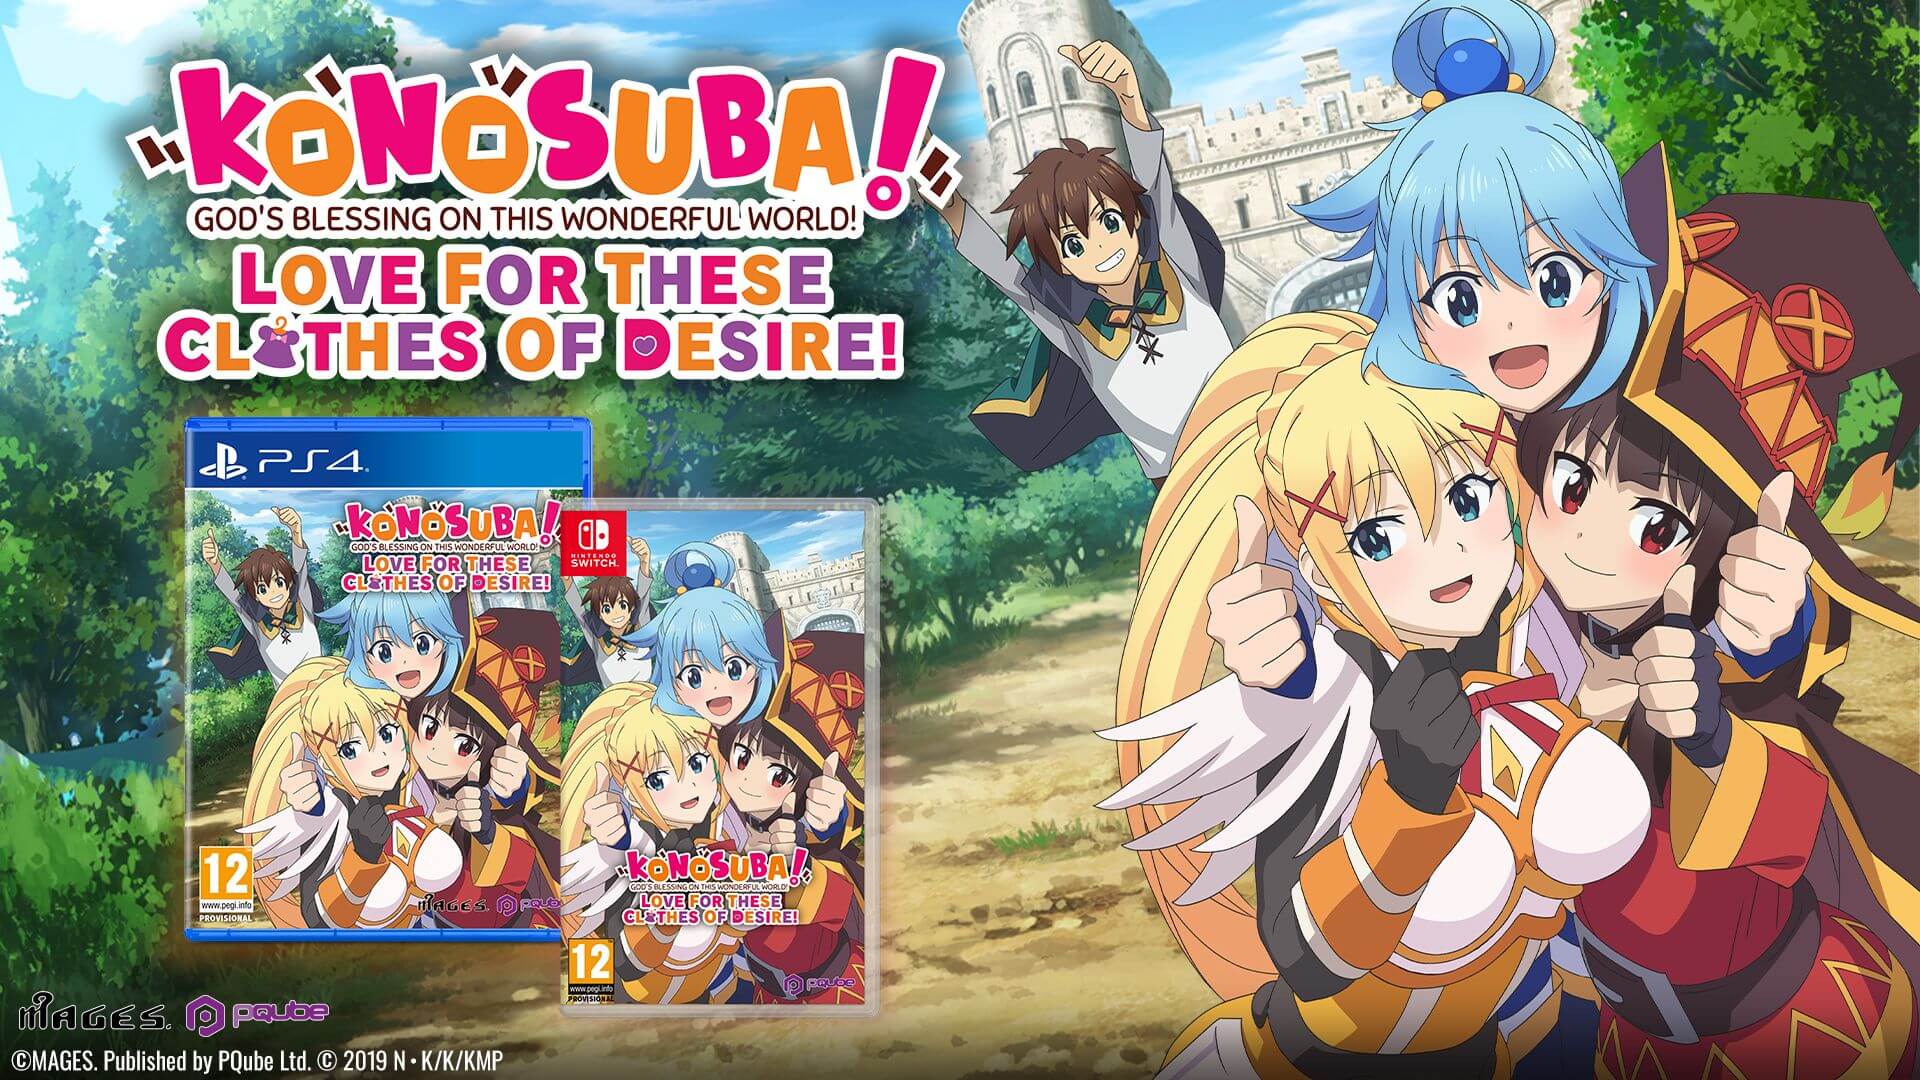  KonoSuba: God’s Blessing on This Wonderful World! Love for these Clothes of Desire! out now